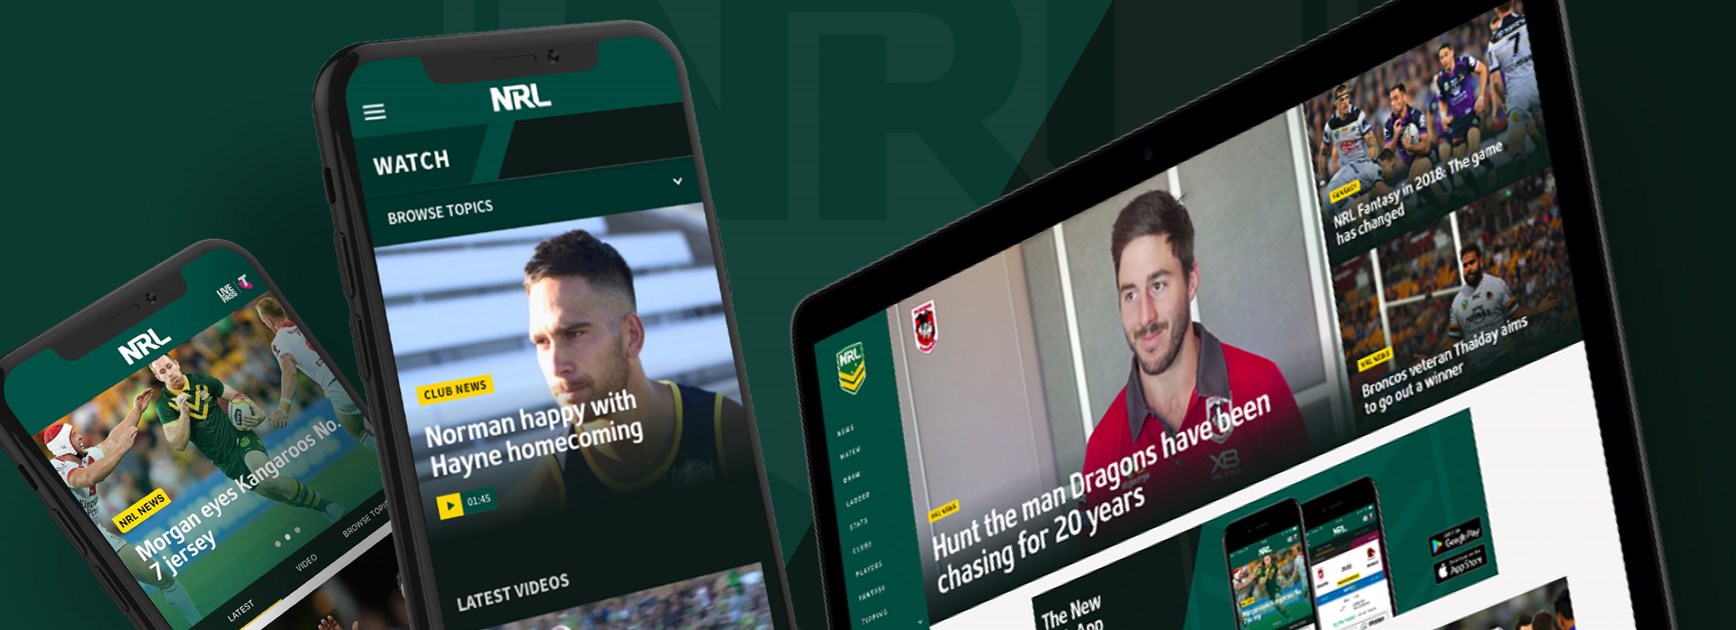 NRL launches new digital network